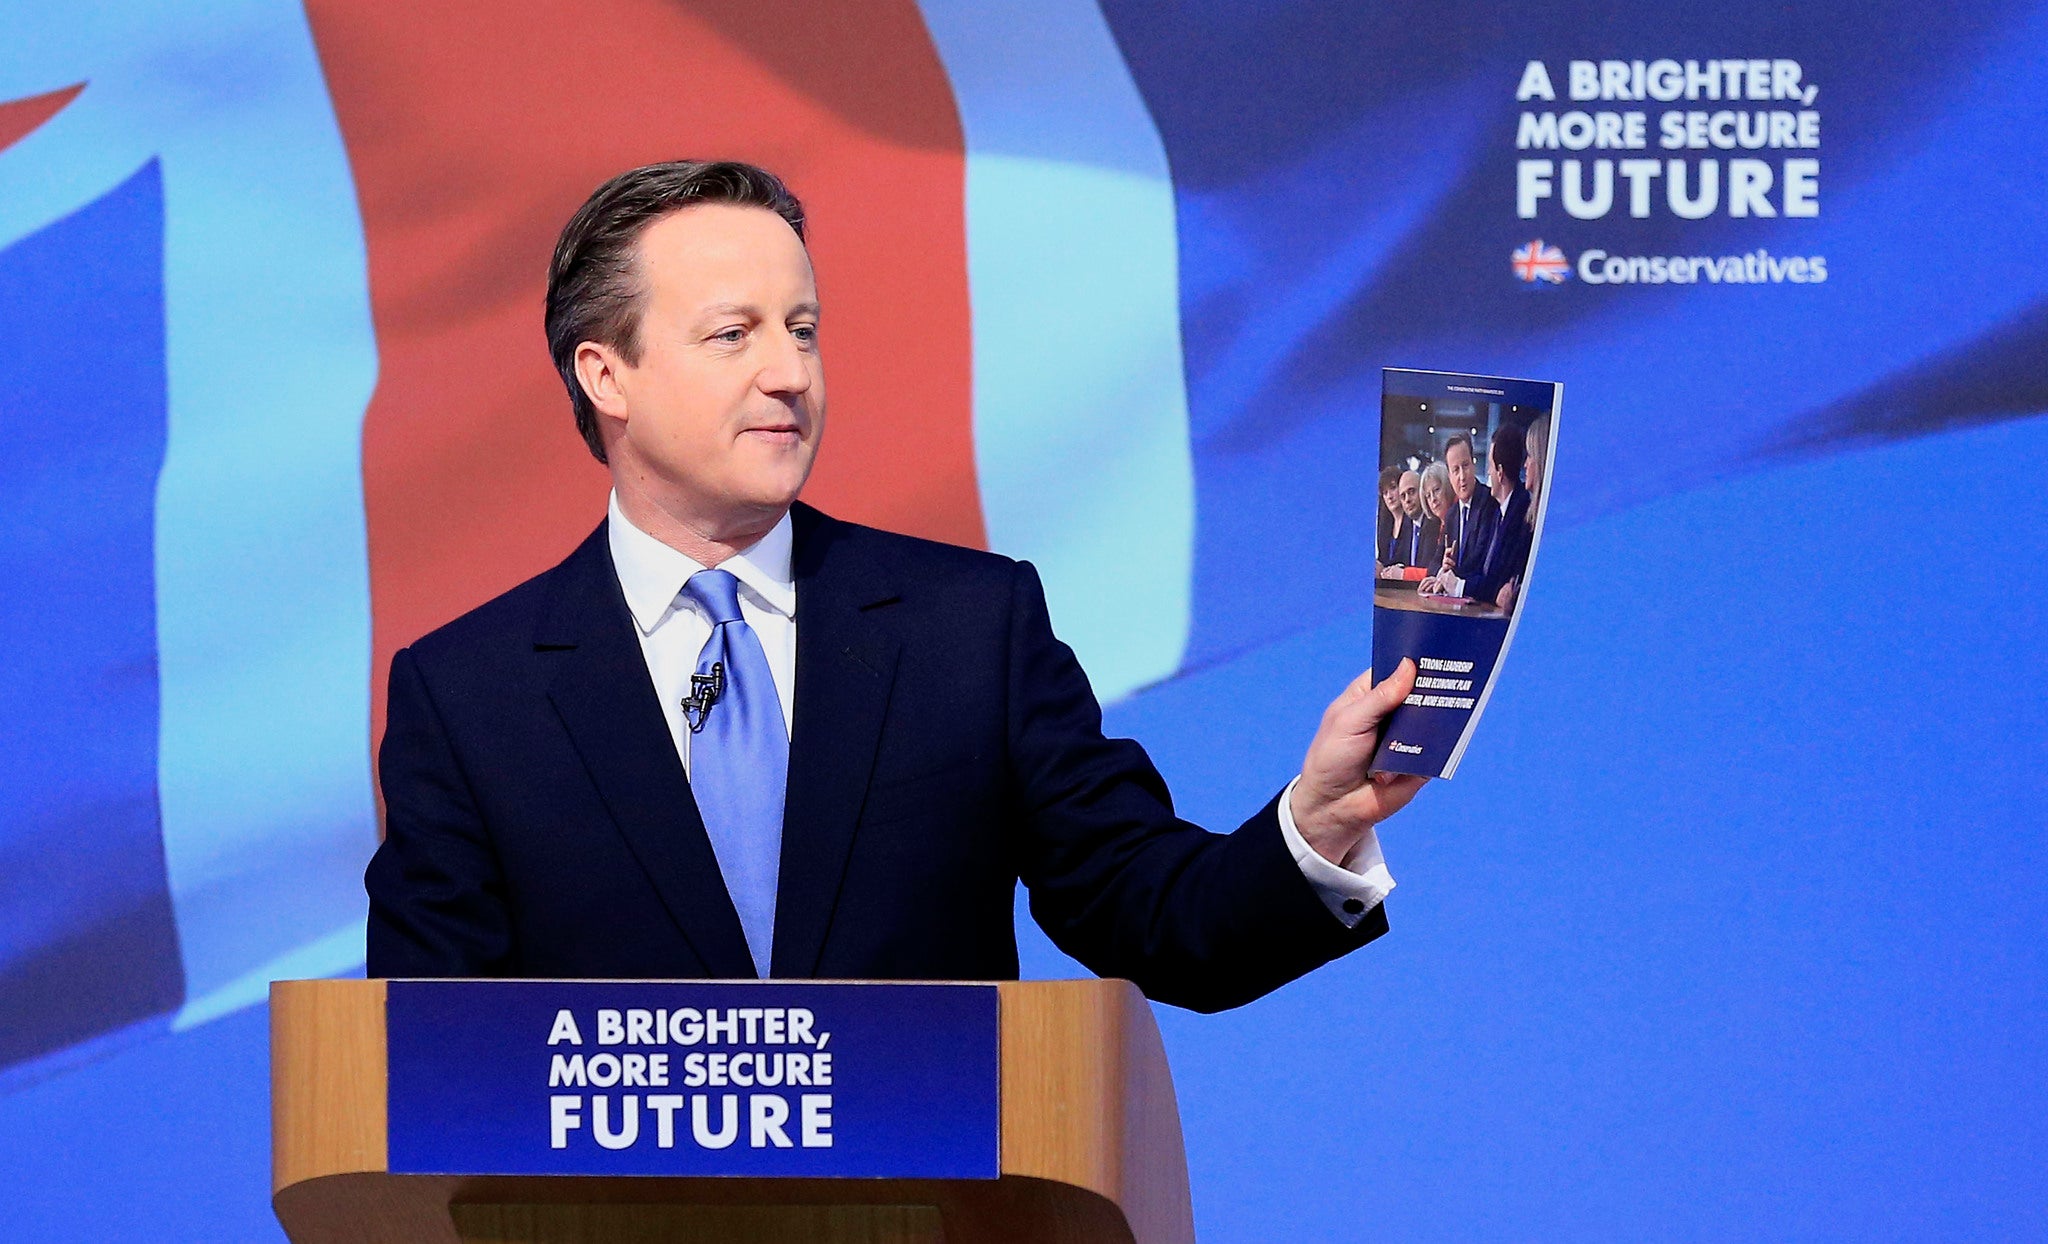 David Cameron shows off the Conservative party's manifesto (PA)